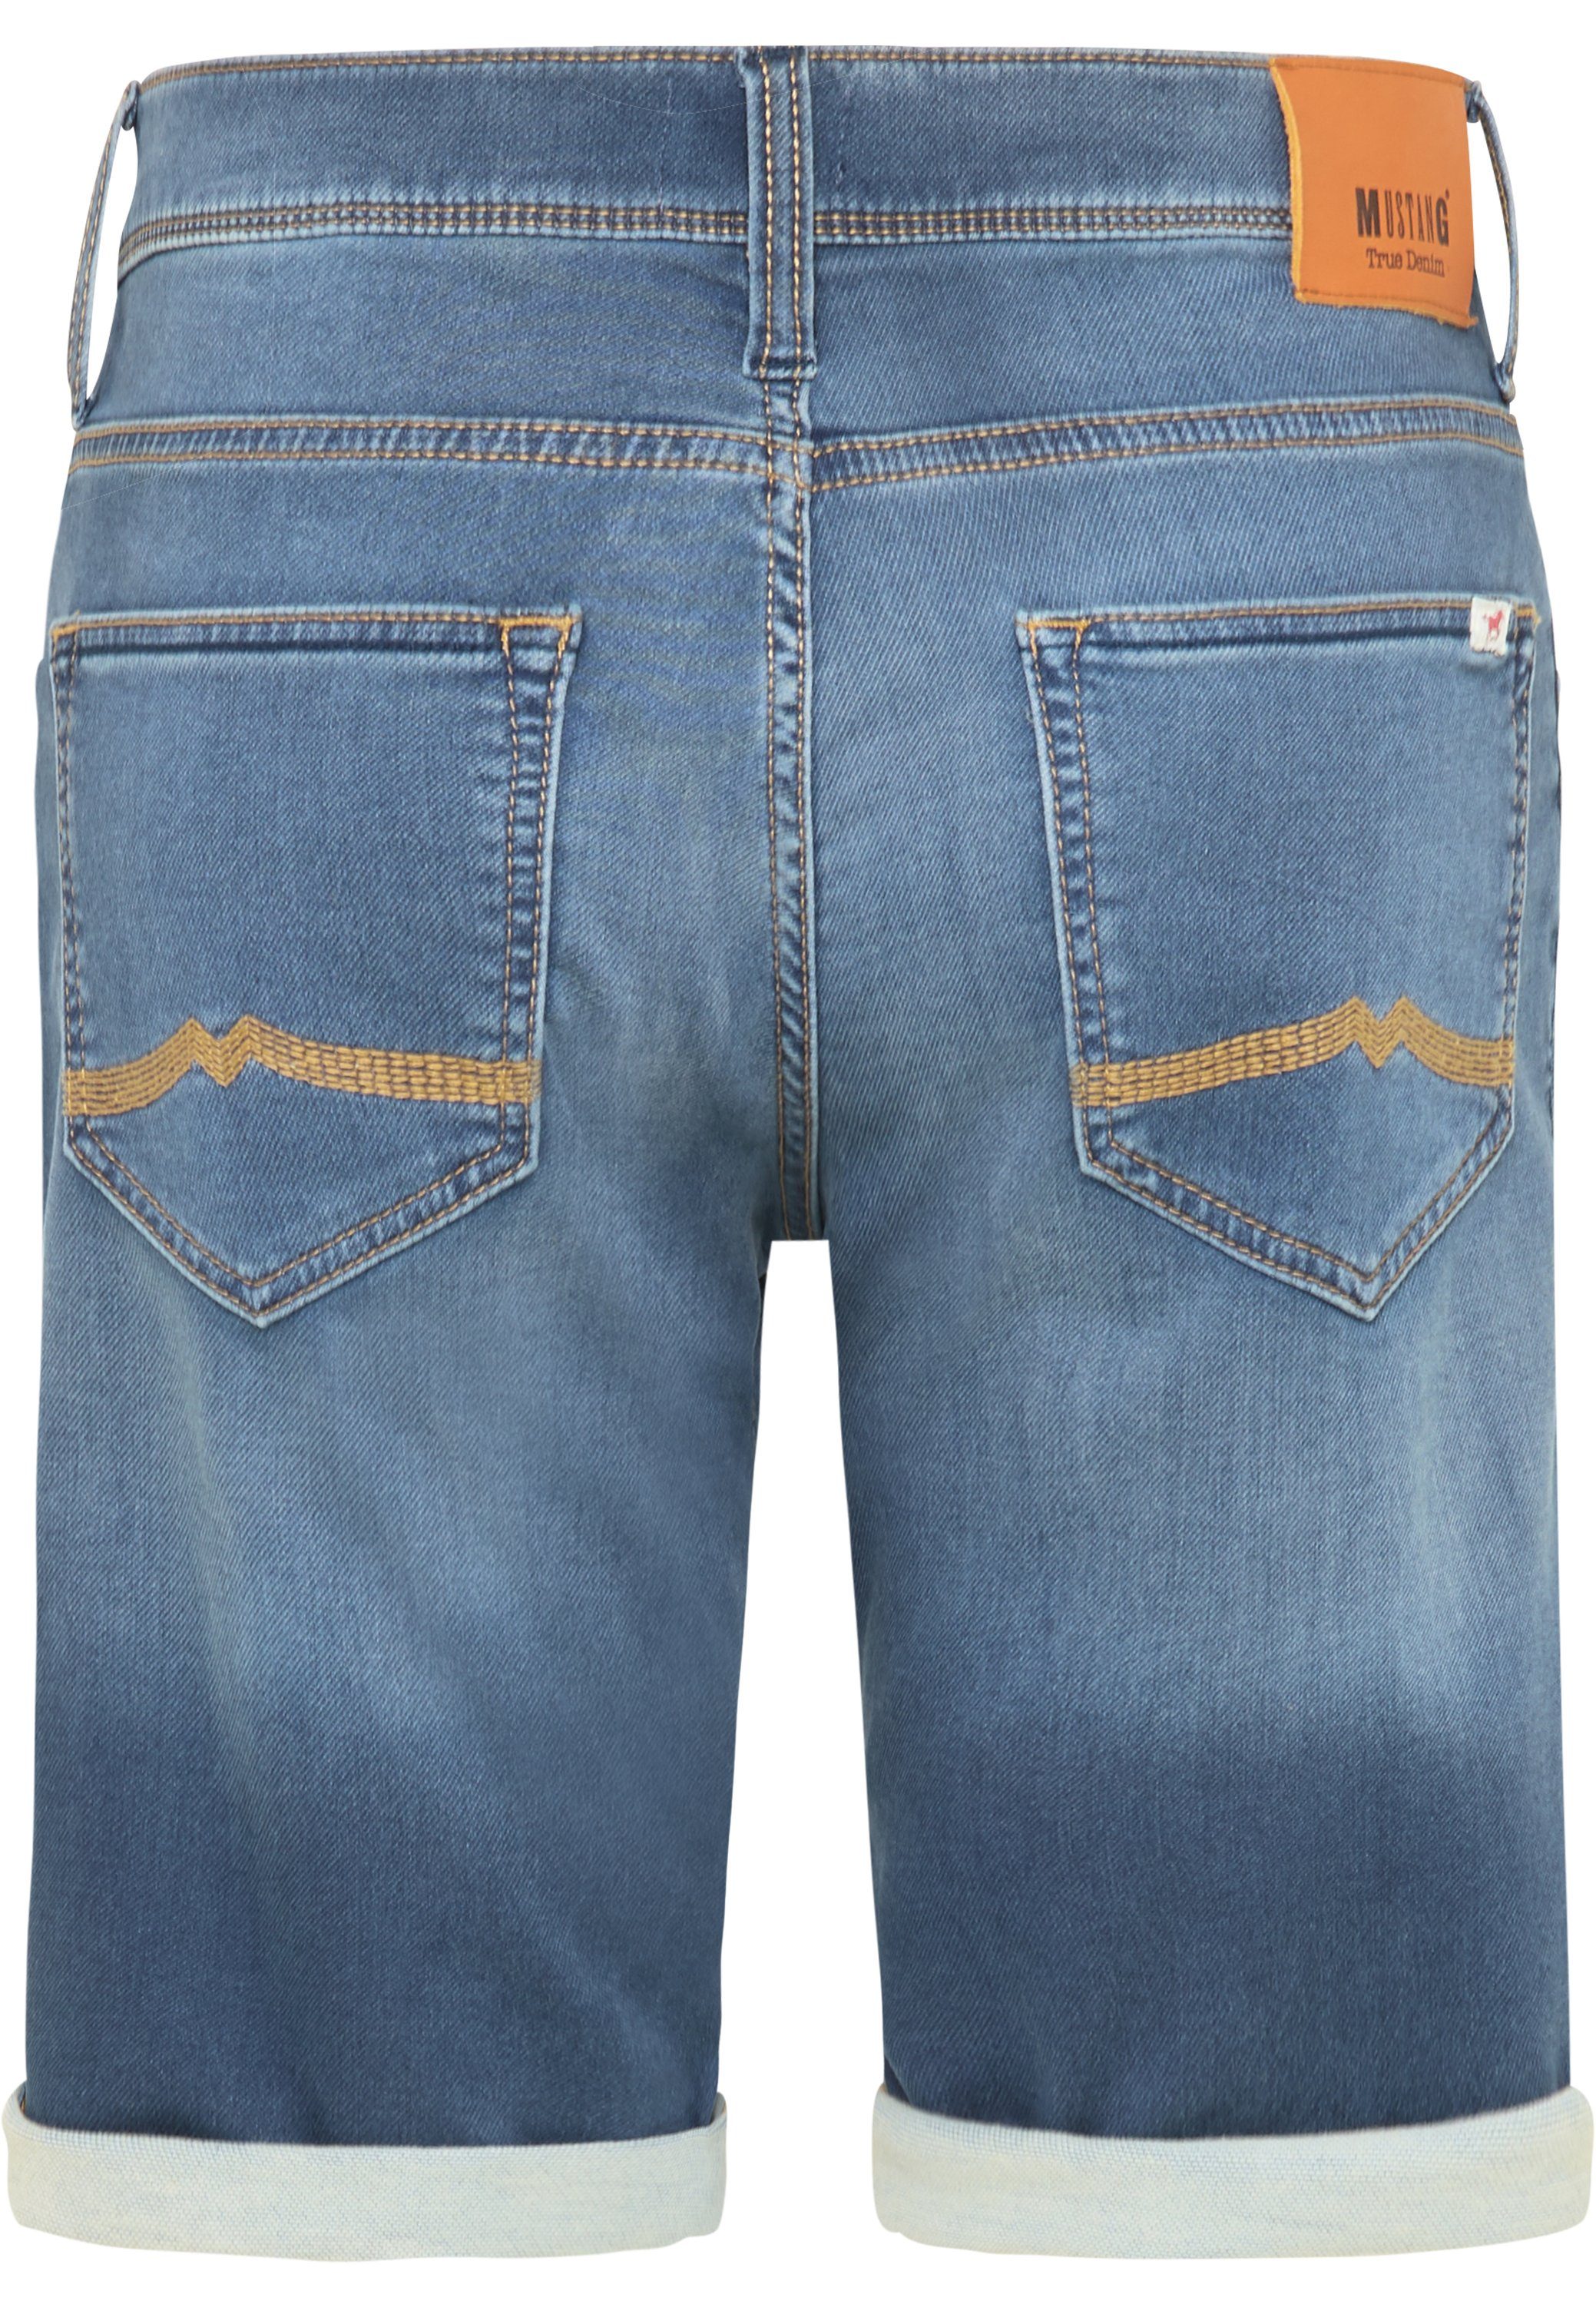 MUSTANG Jeansshorts Blue (943) Washed Hose Short Chicago Mustang